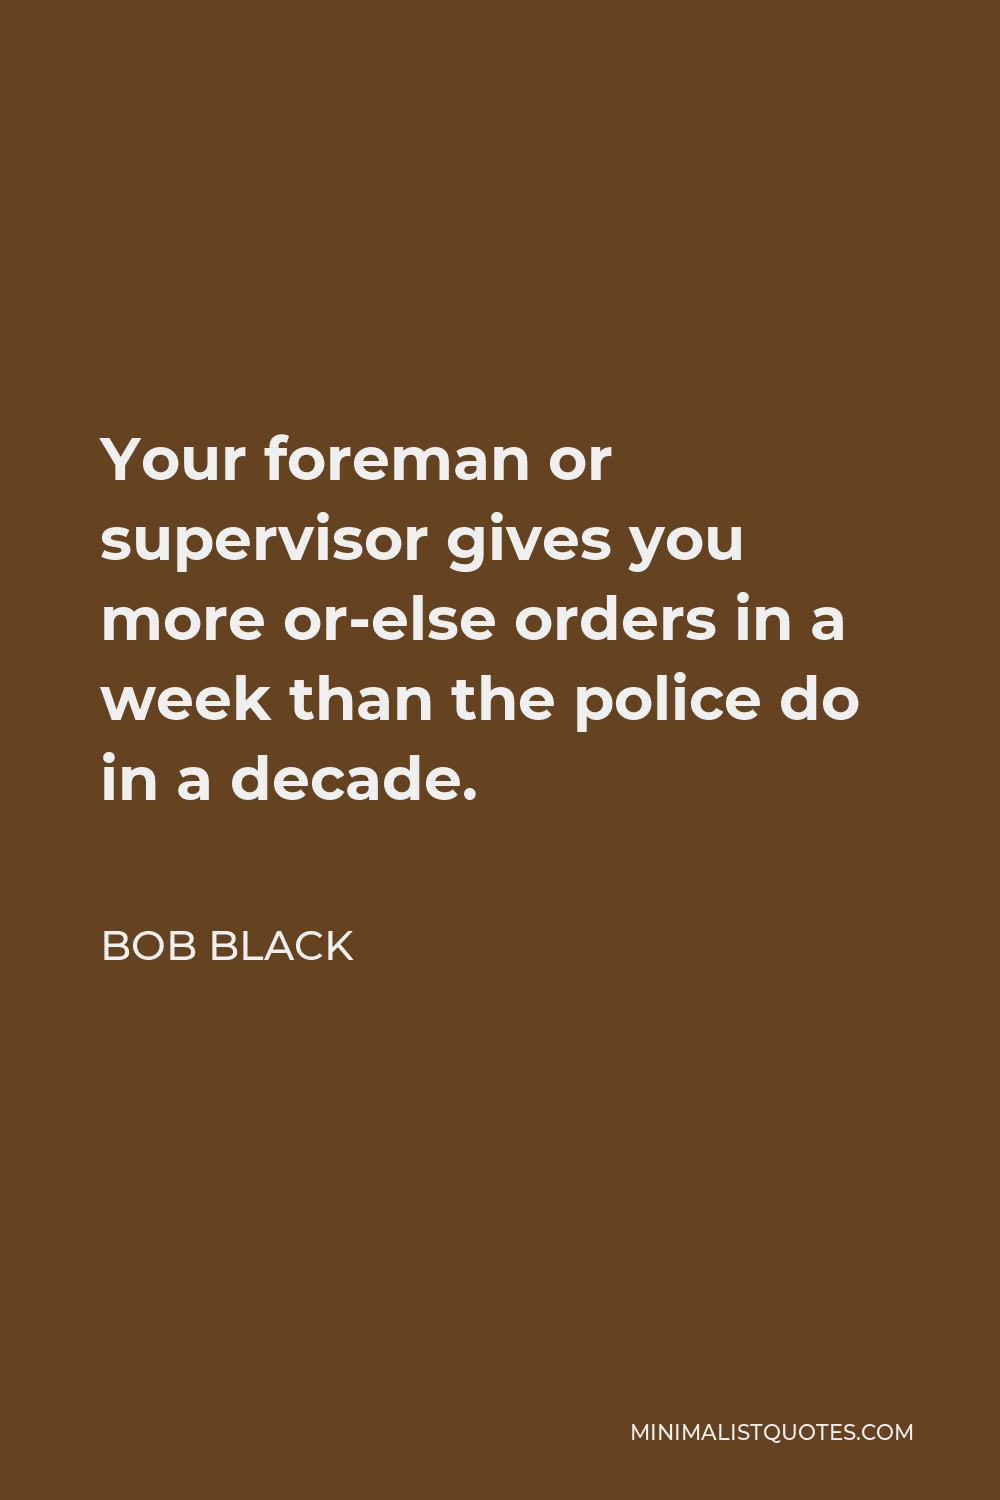 Bob Black Quote - Your foreman or supervisor gives you more or-else orders in a week than the police do in a decade.